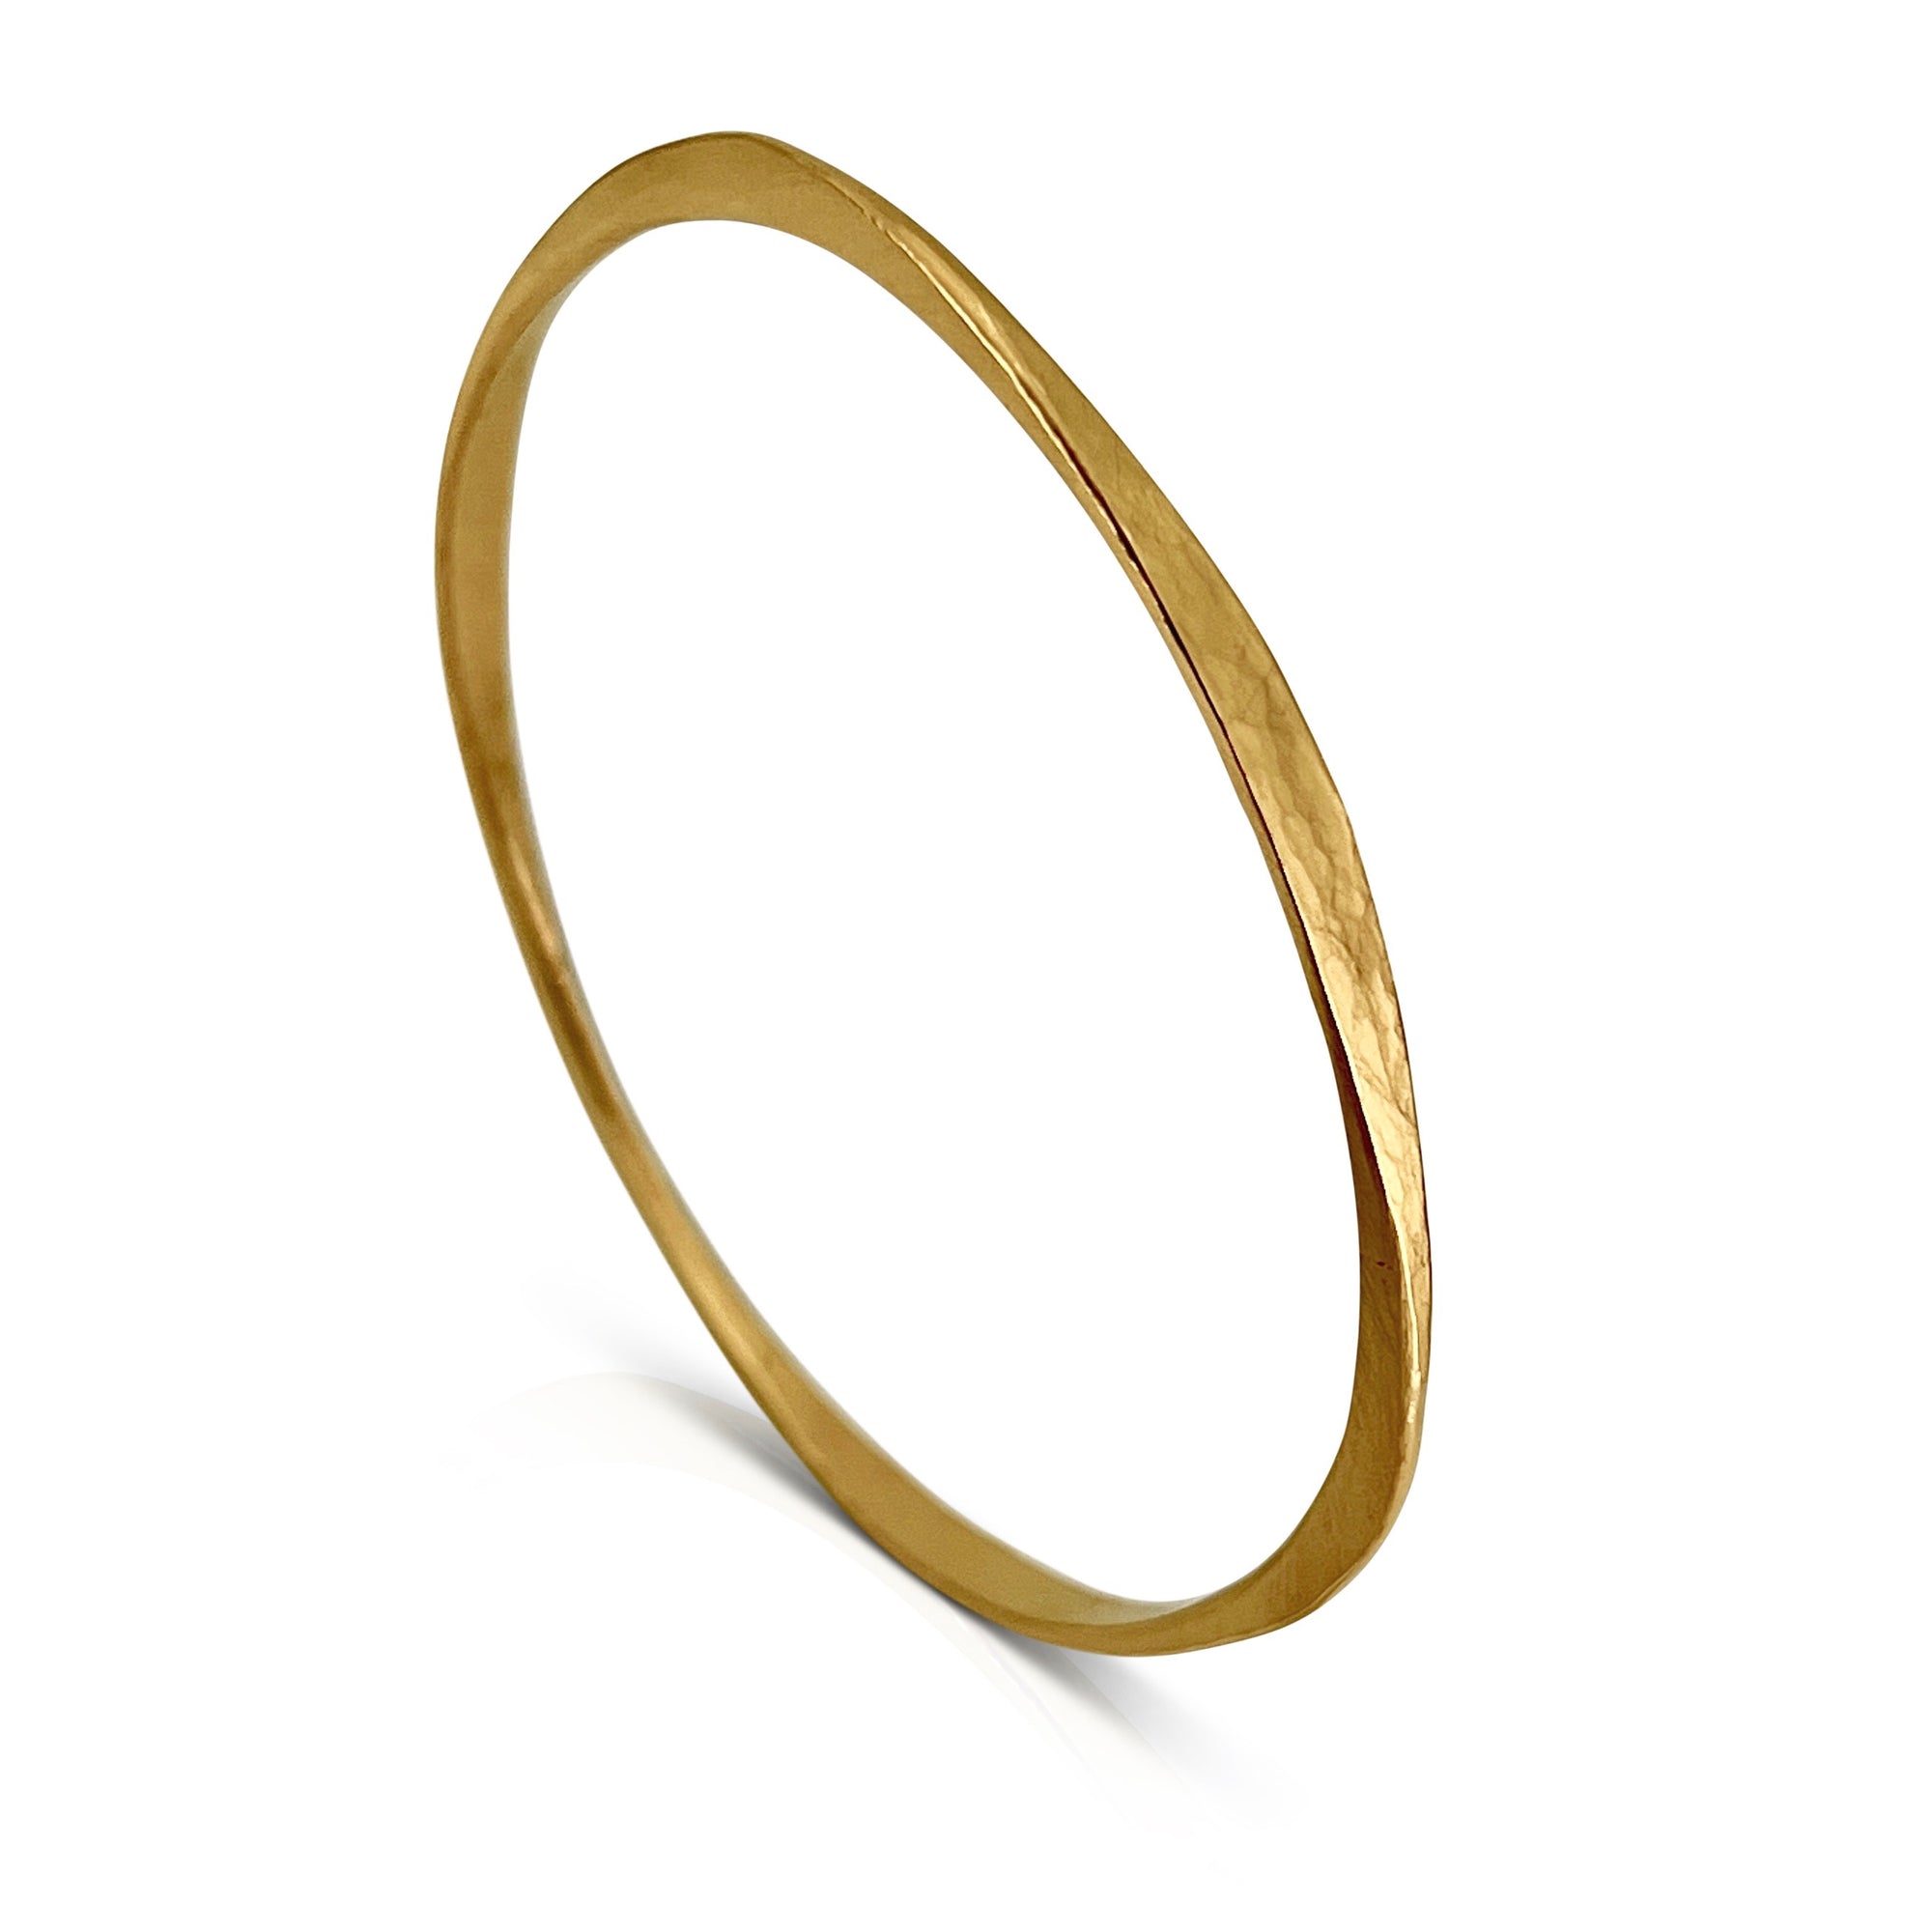 Forged sterling silver bangle bracelet with 18k yellow gold vermeil overlay by Ayesha Mayadas